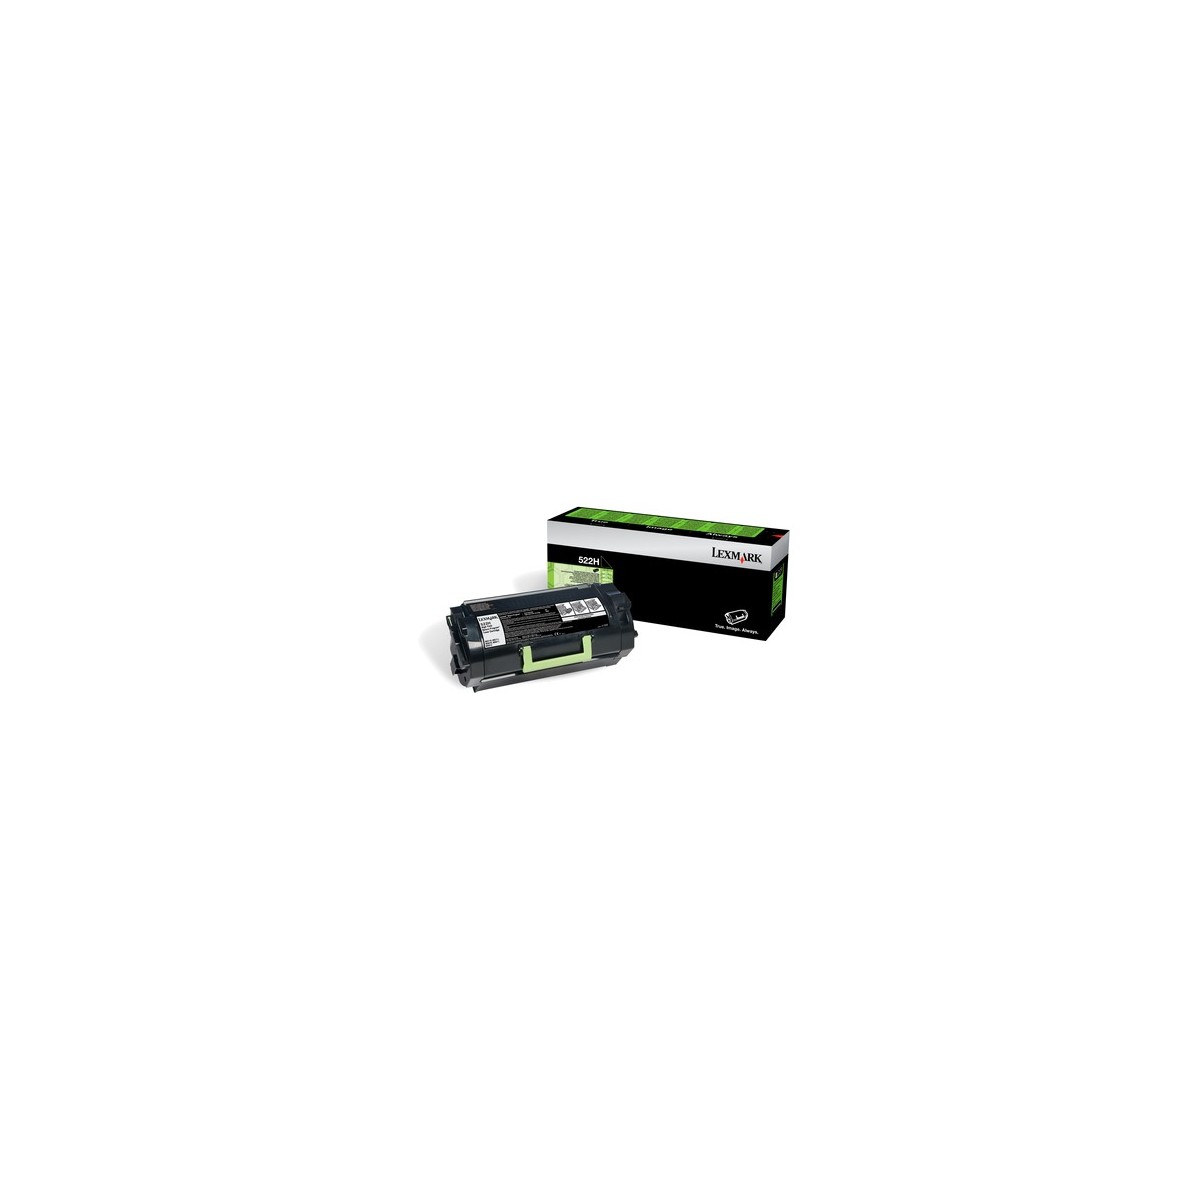 Lexmark 522H - 25000 pages - Black - 1 pc(s)